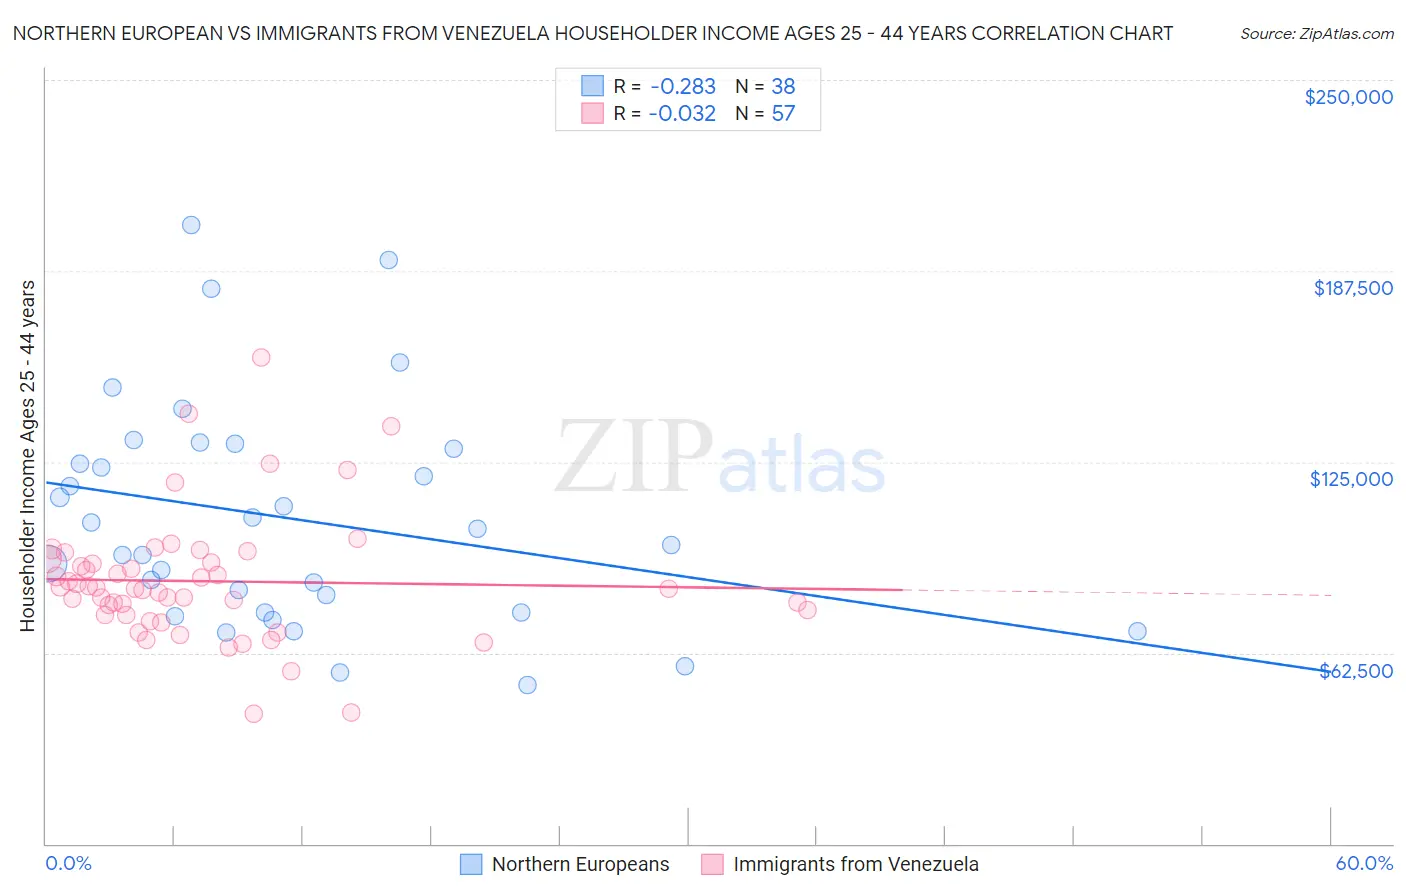 Northern European vs Immigrants from Venezuela Householder Income Ages 25 - 44 years